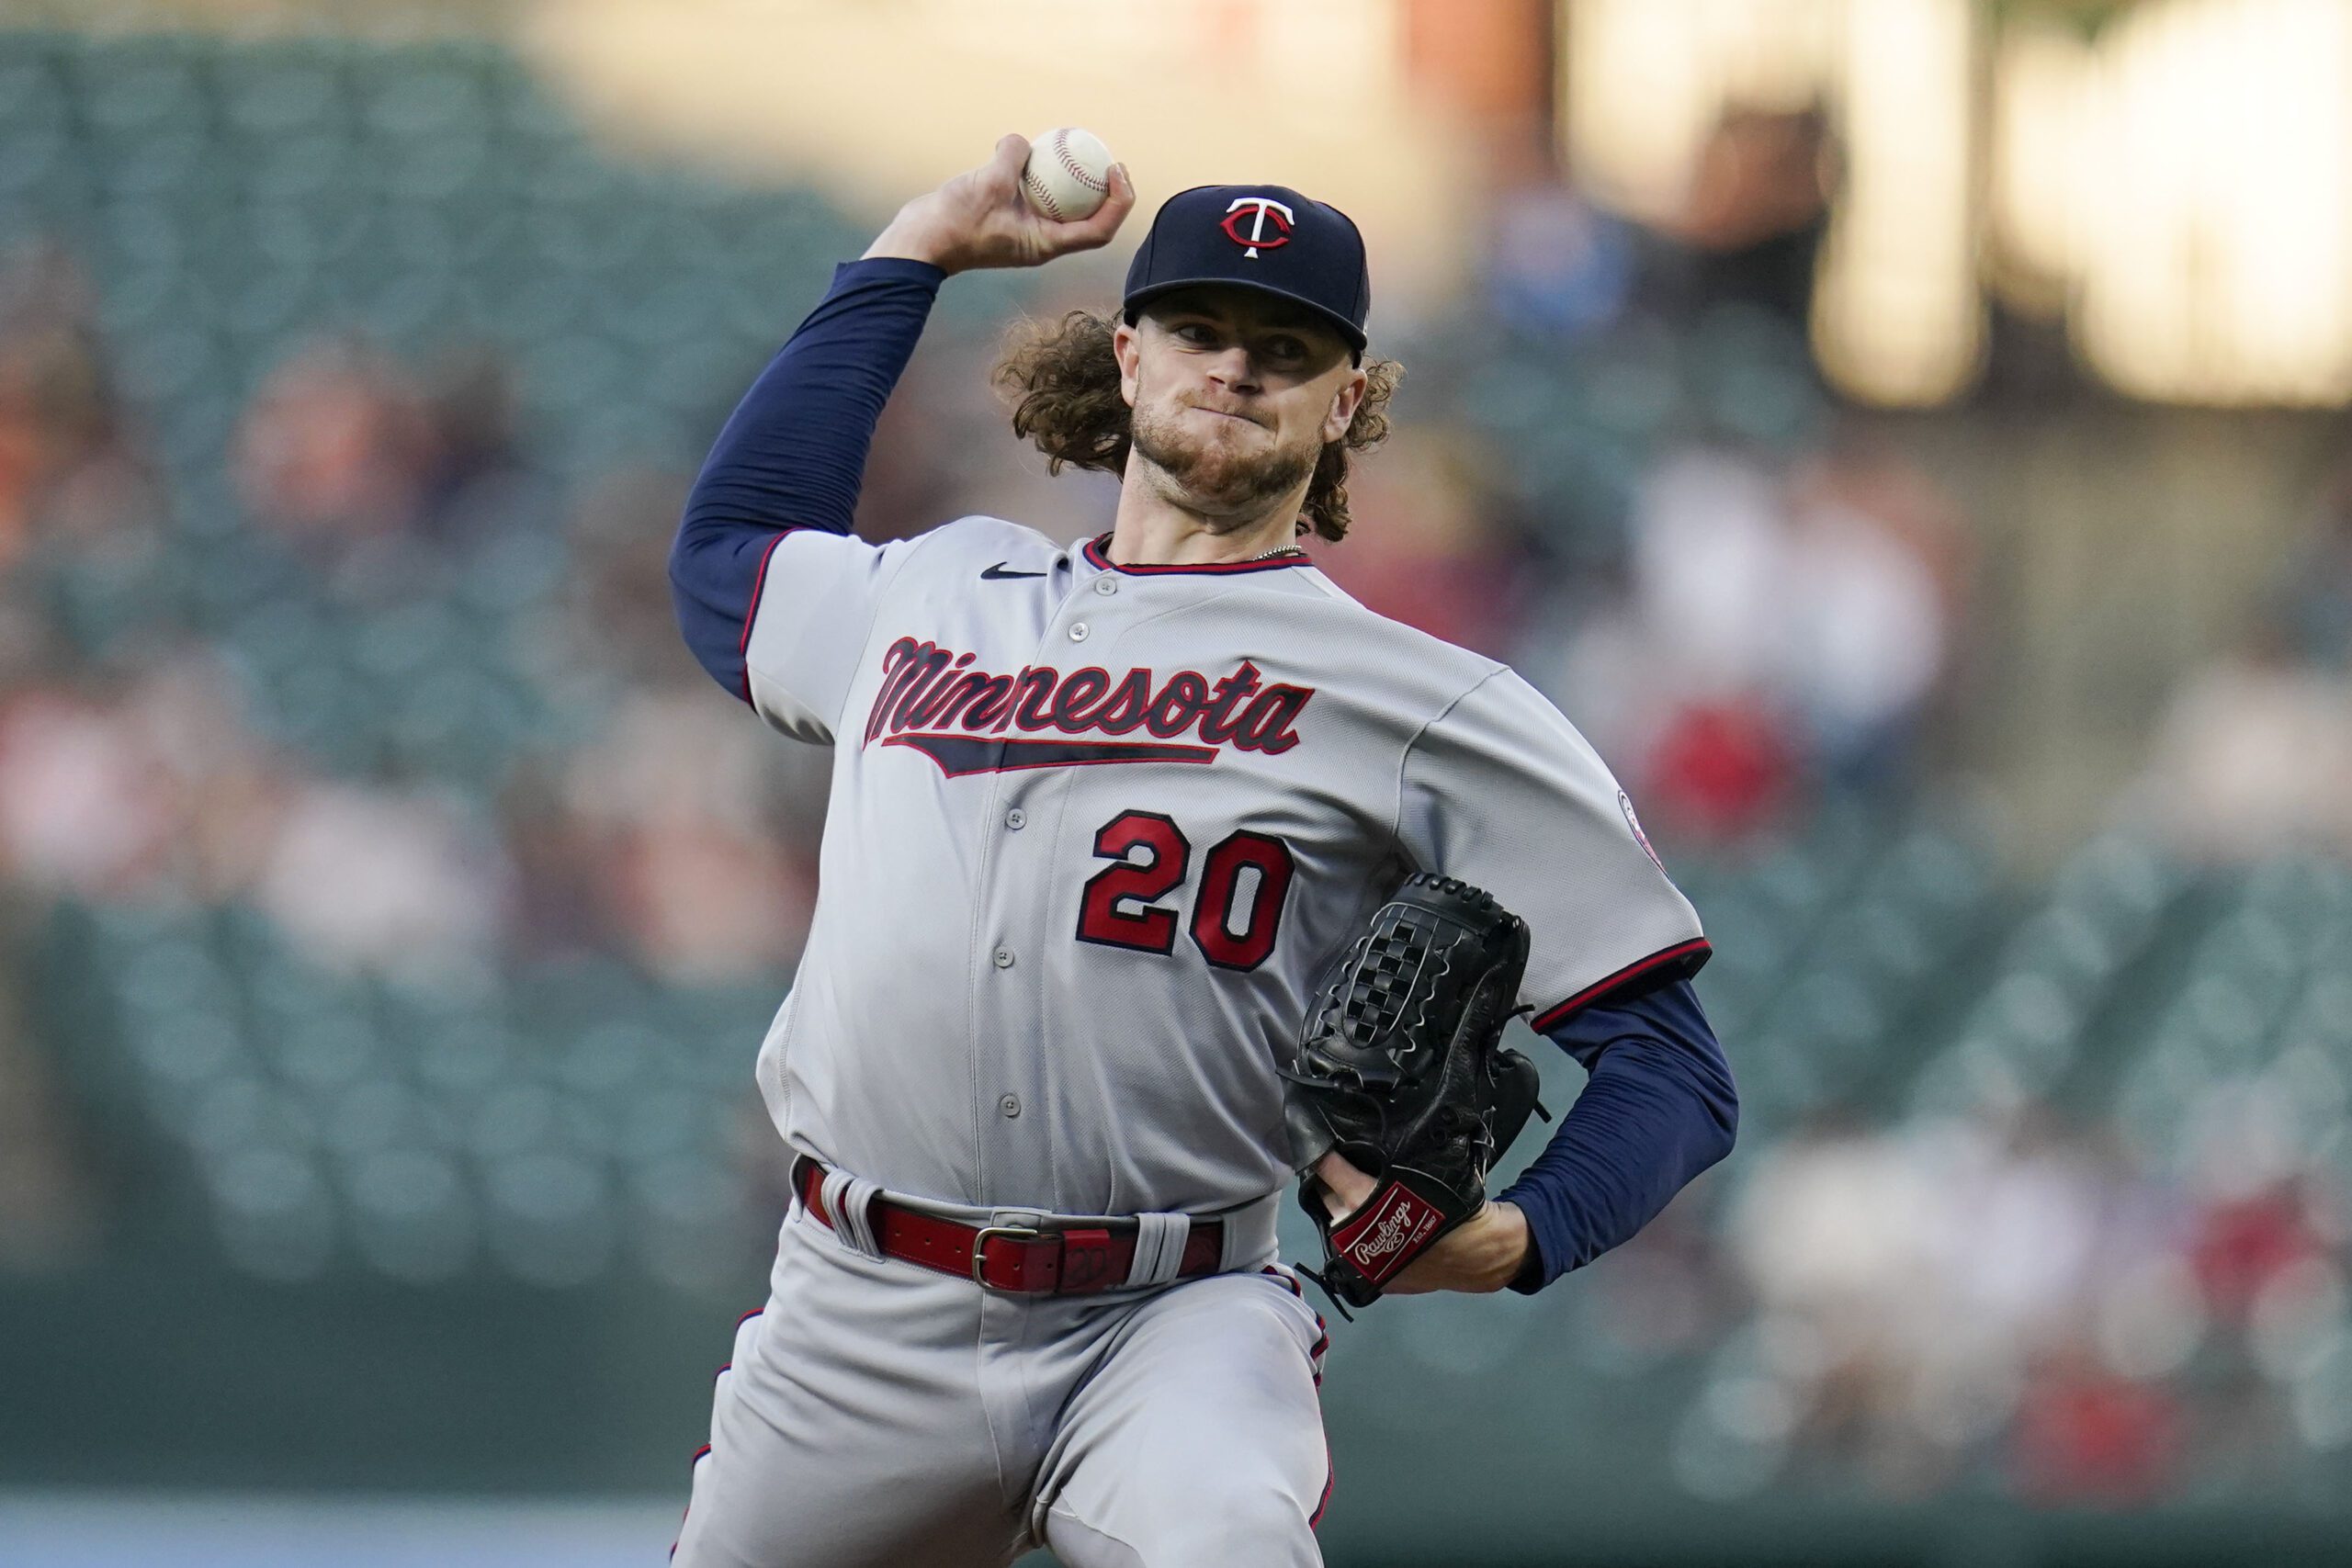 Gallo blasts 2 homers, Twins sweep Royals with 7-4 win